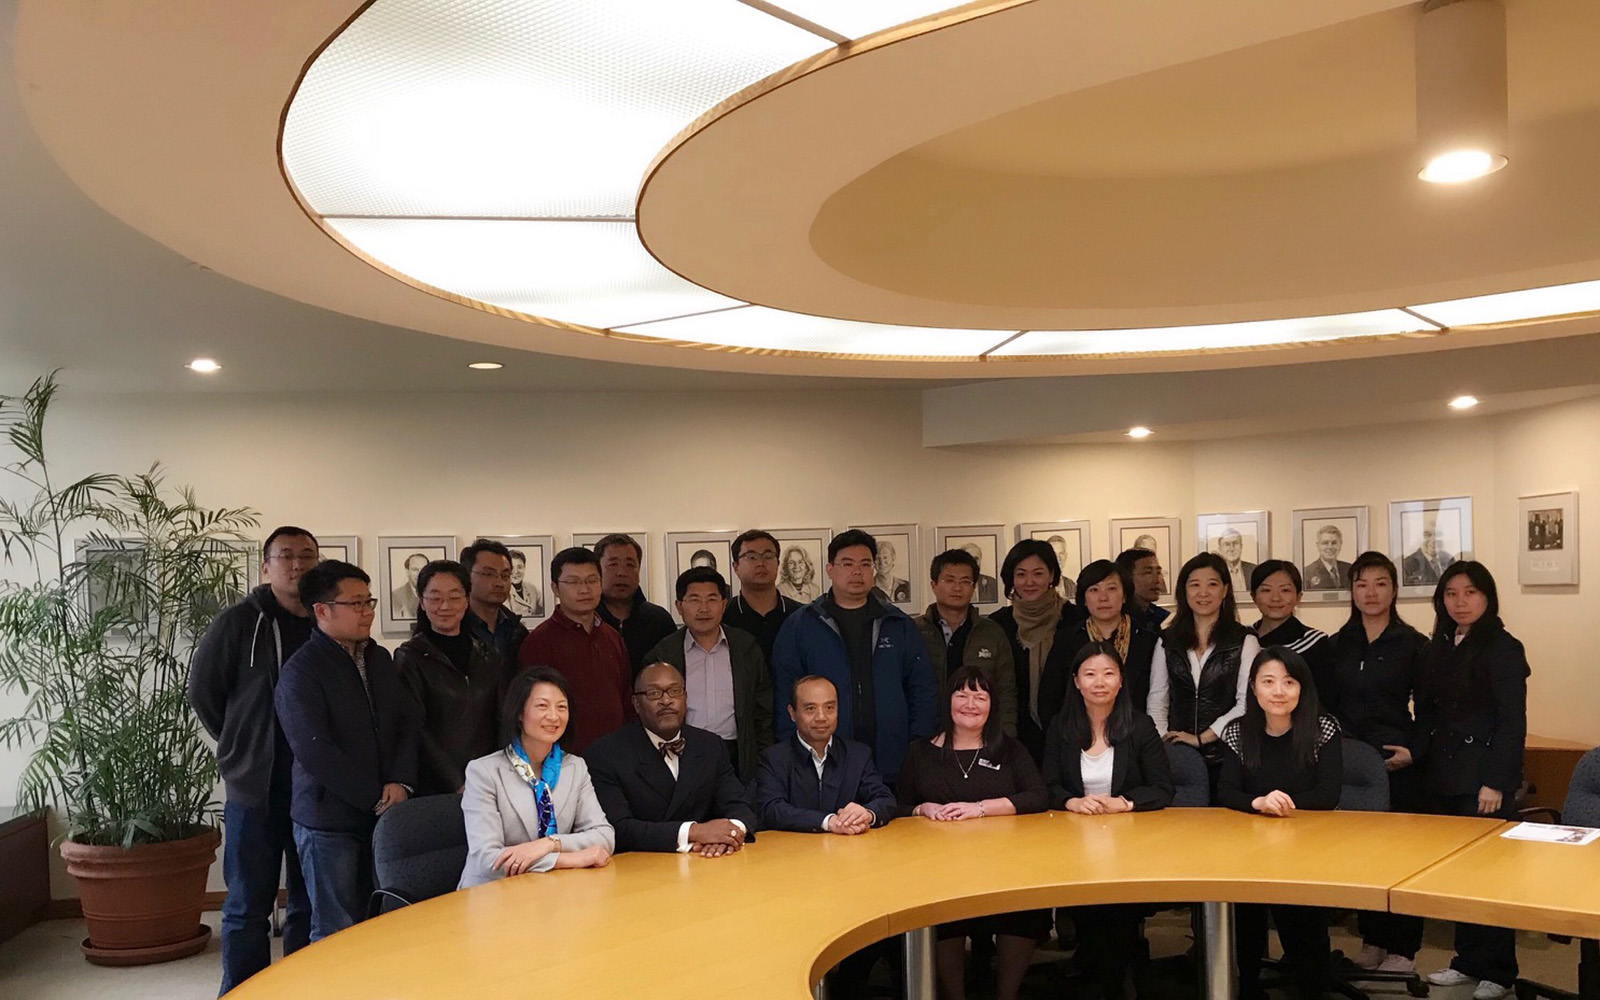 In late October, the Connecticut Small Business Development Center (CTSBDC) and the UConn School of Business addressed a business delegation from China. (Emily Carter/Connecticut Small Business Development Center)